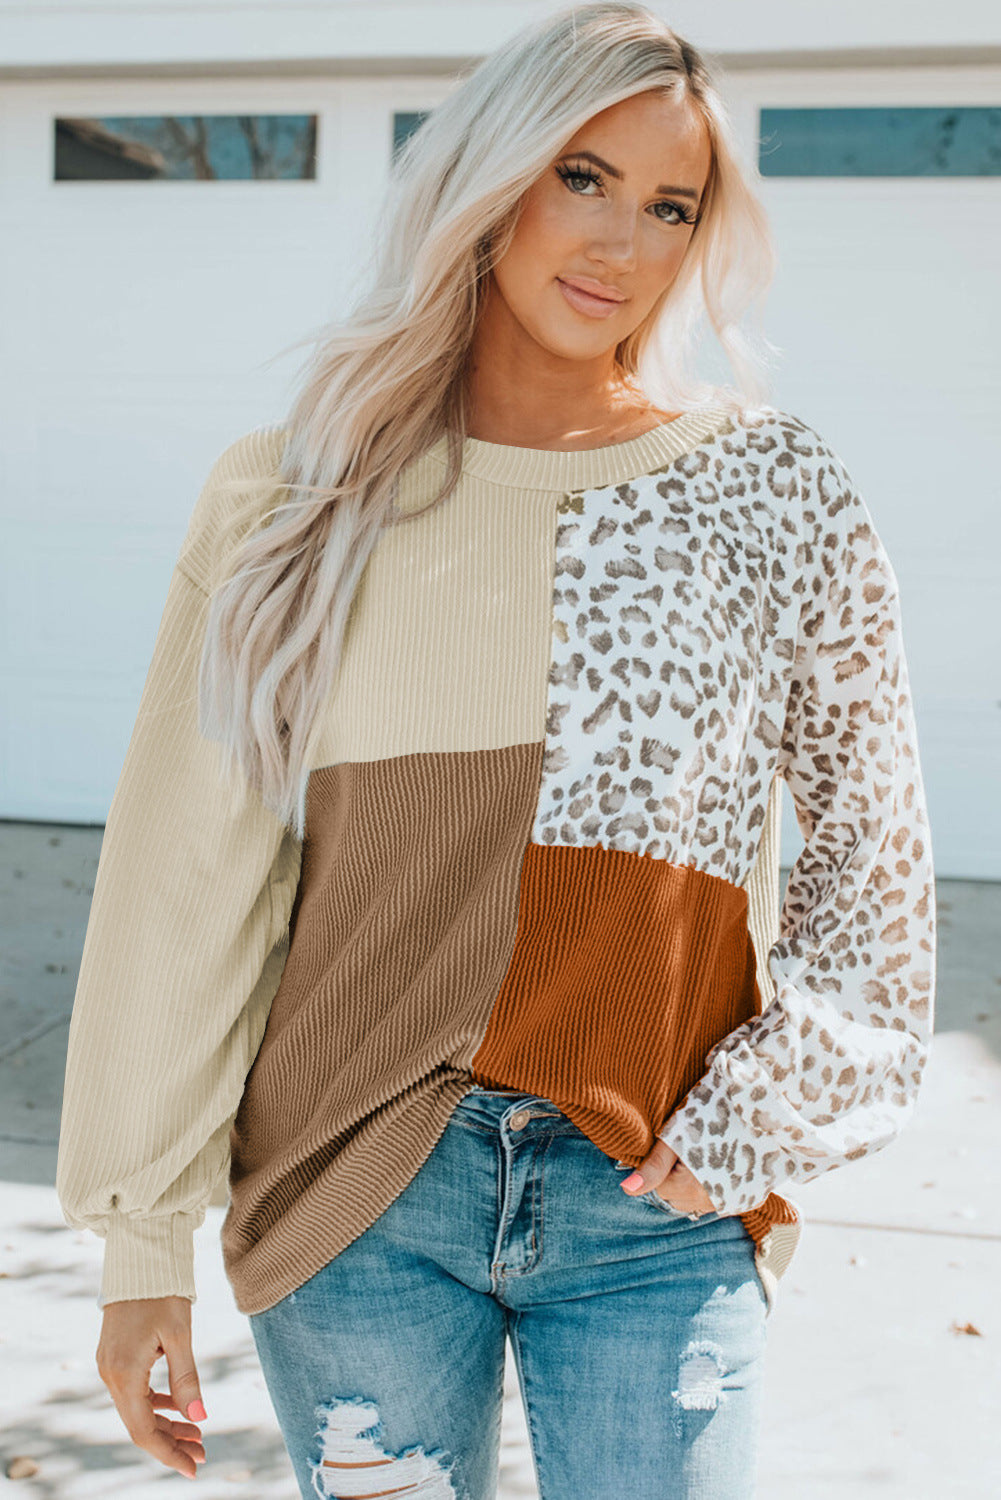 Women's Color Leopard Print Knitted Long-sleeved Tops